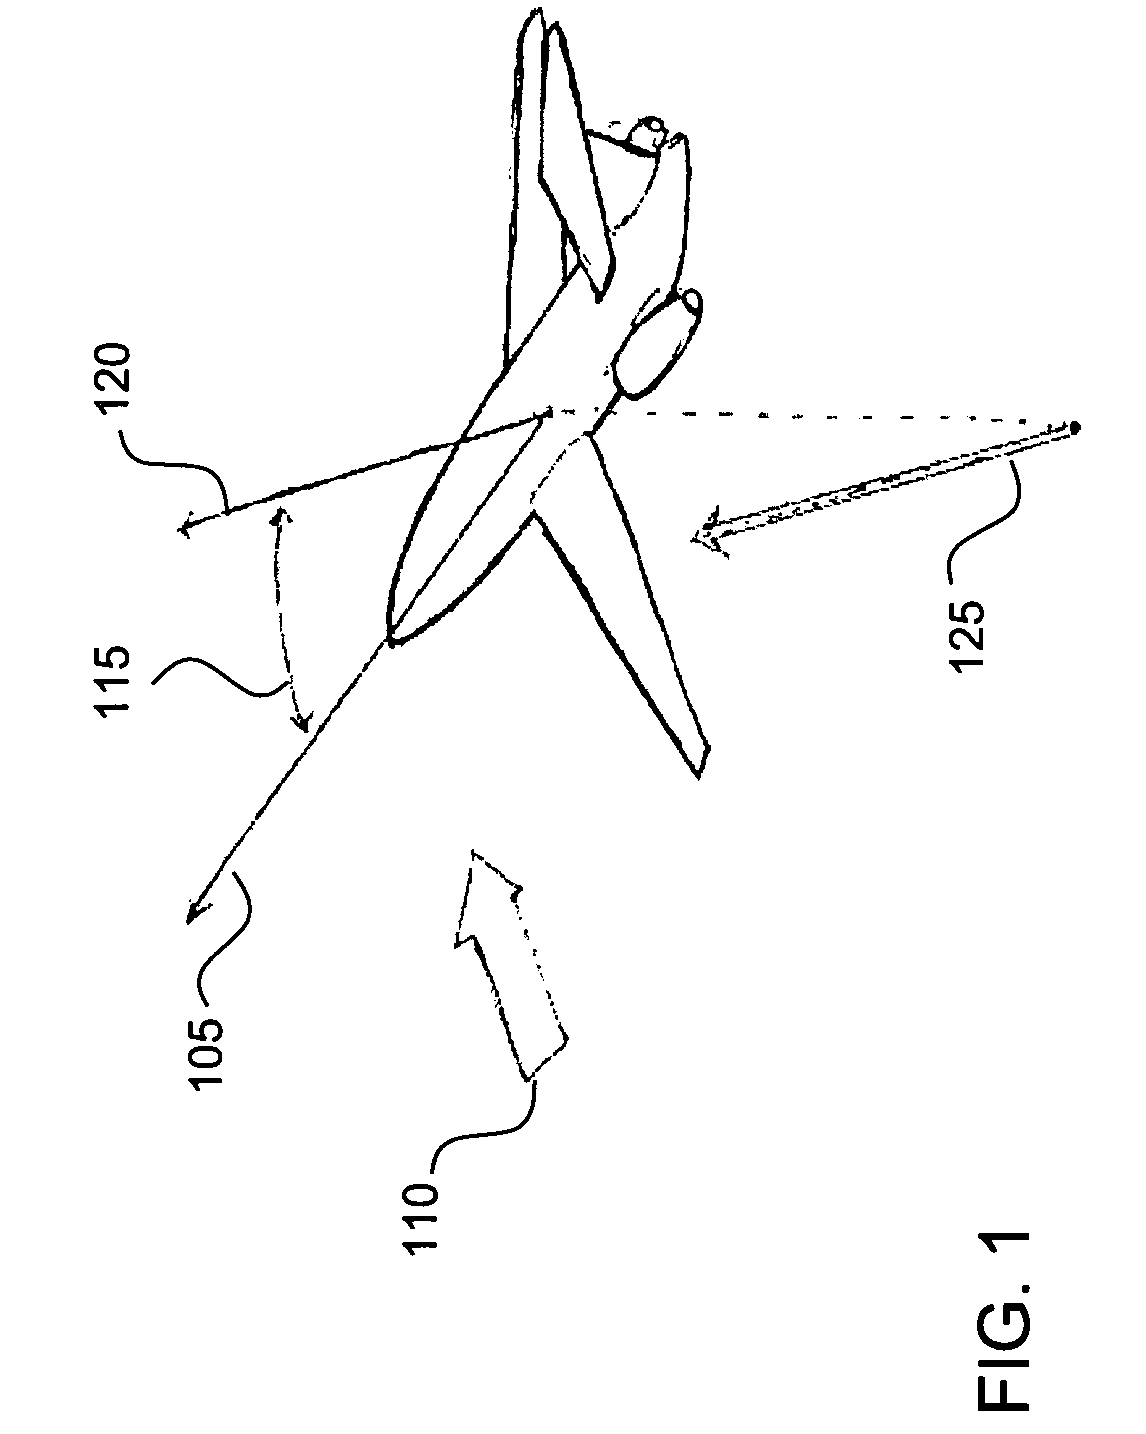 System and method for presenting aircraft heading and track in a track-forward display format